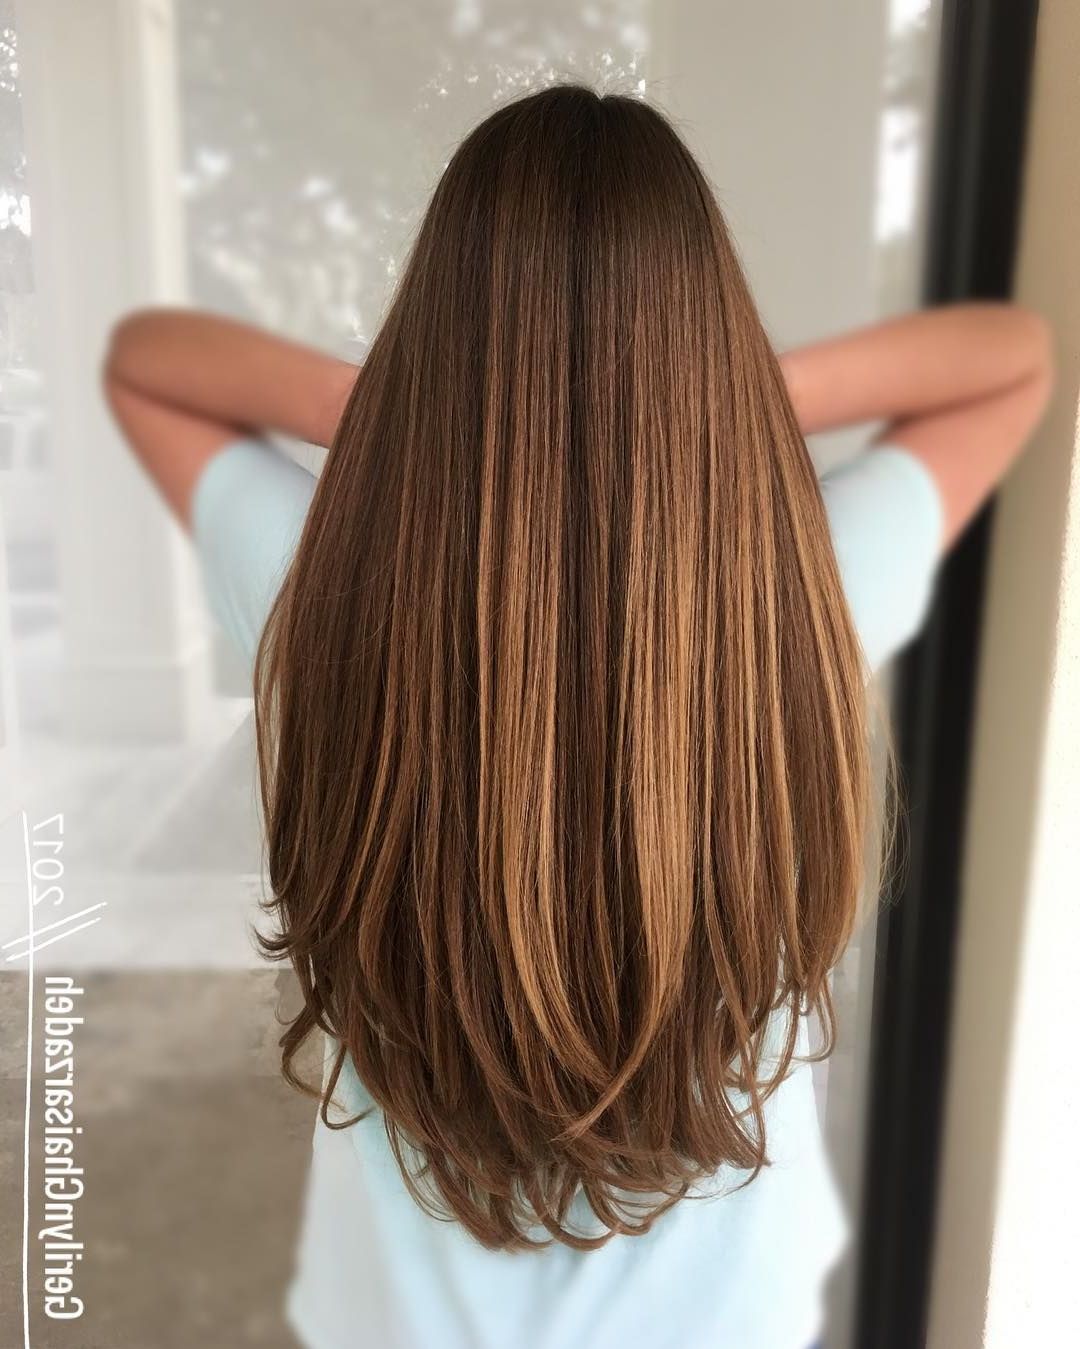 Gaining Trust From A Young Woman, With A Trim And Subtle Long Layers Inside Favorite Long Hairstyles With Subtle Layers (View 4 of 20)